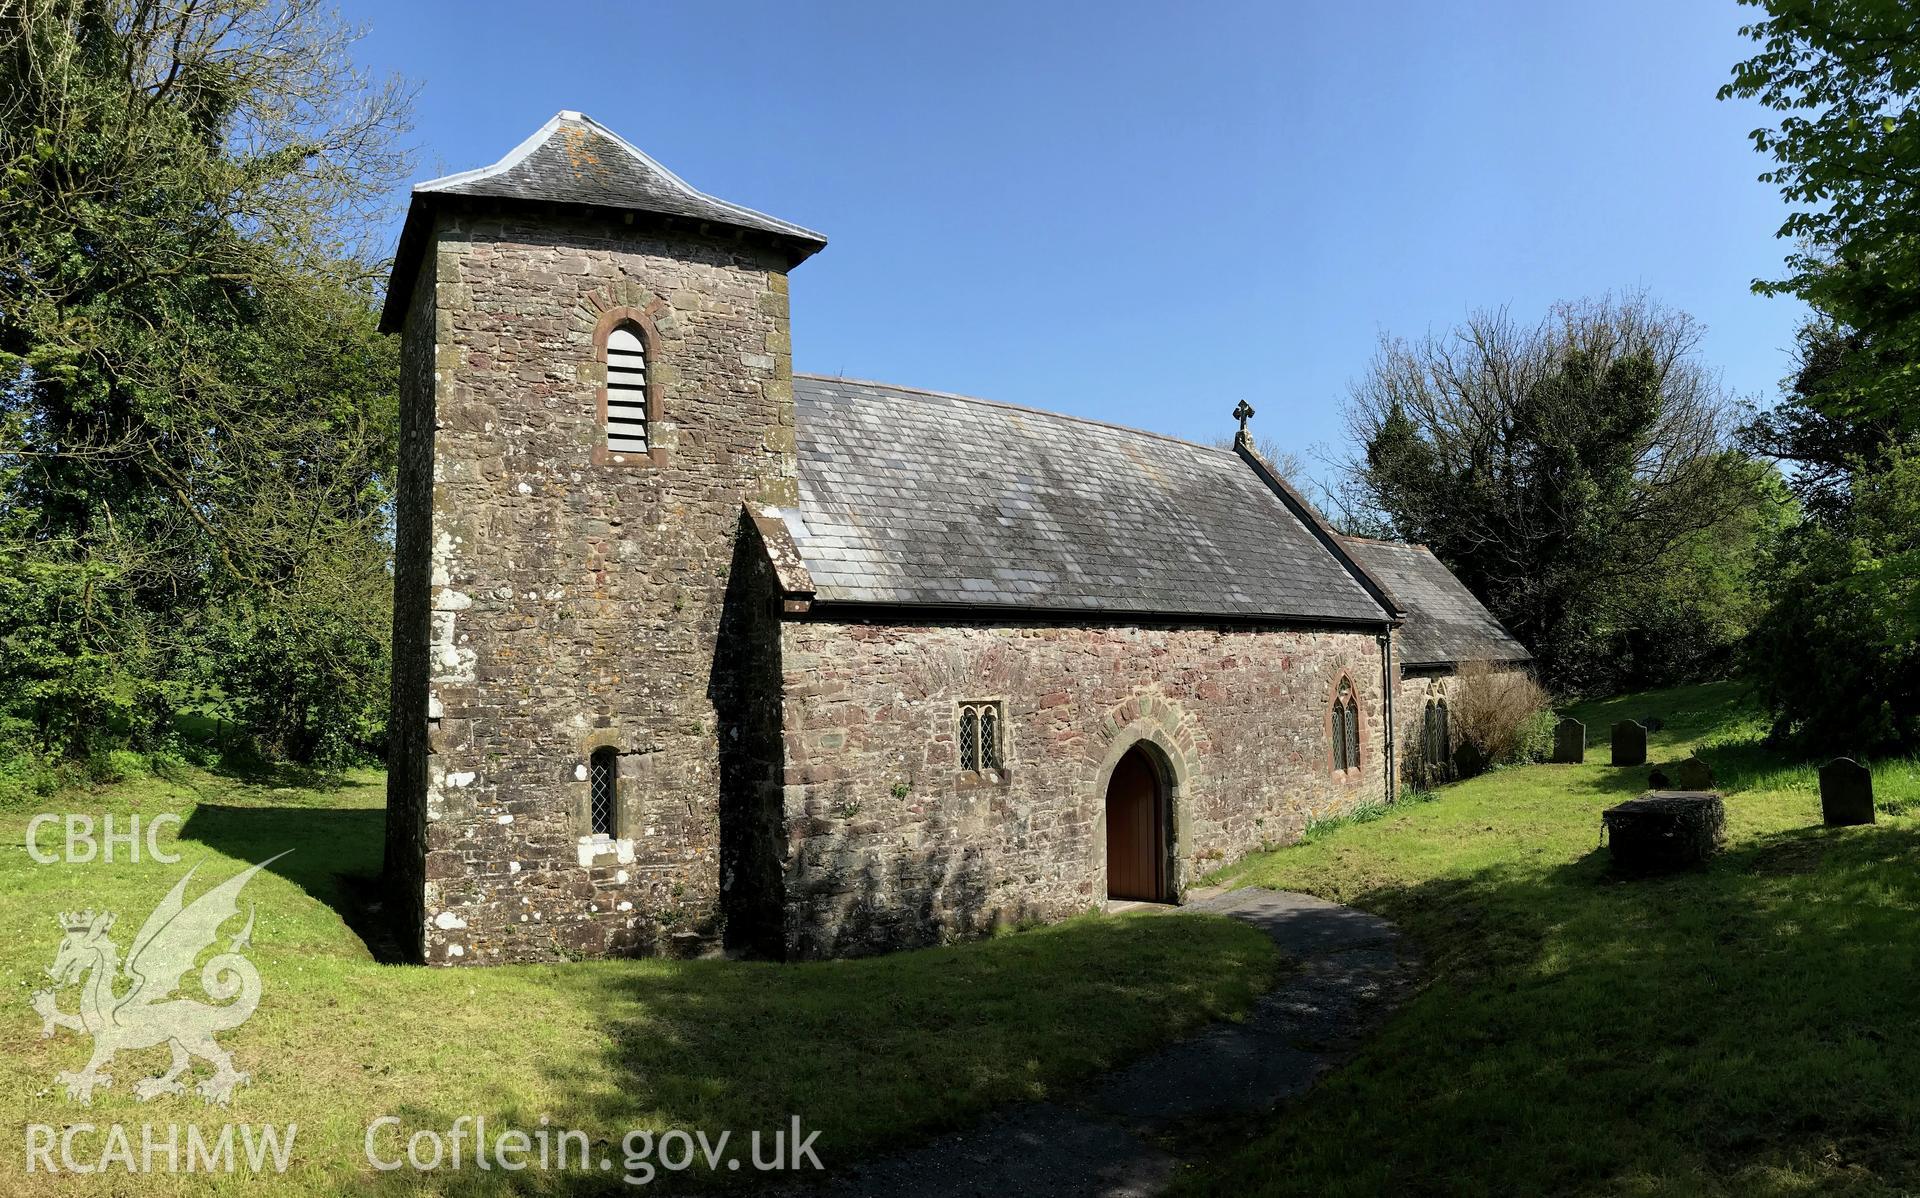 Colour photo showing external view of the church of St. Odoceus and St. Margaret Marlos, Llandawke, taken by Paul R. Davis, 6th May 2018.